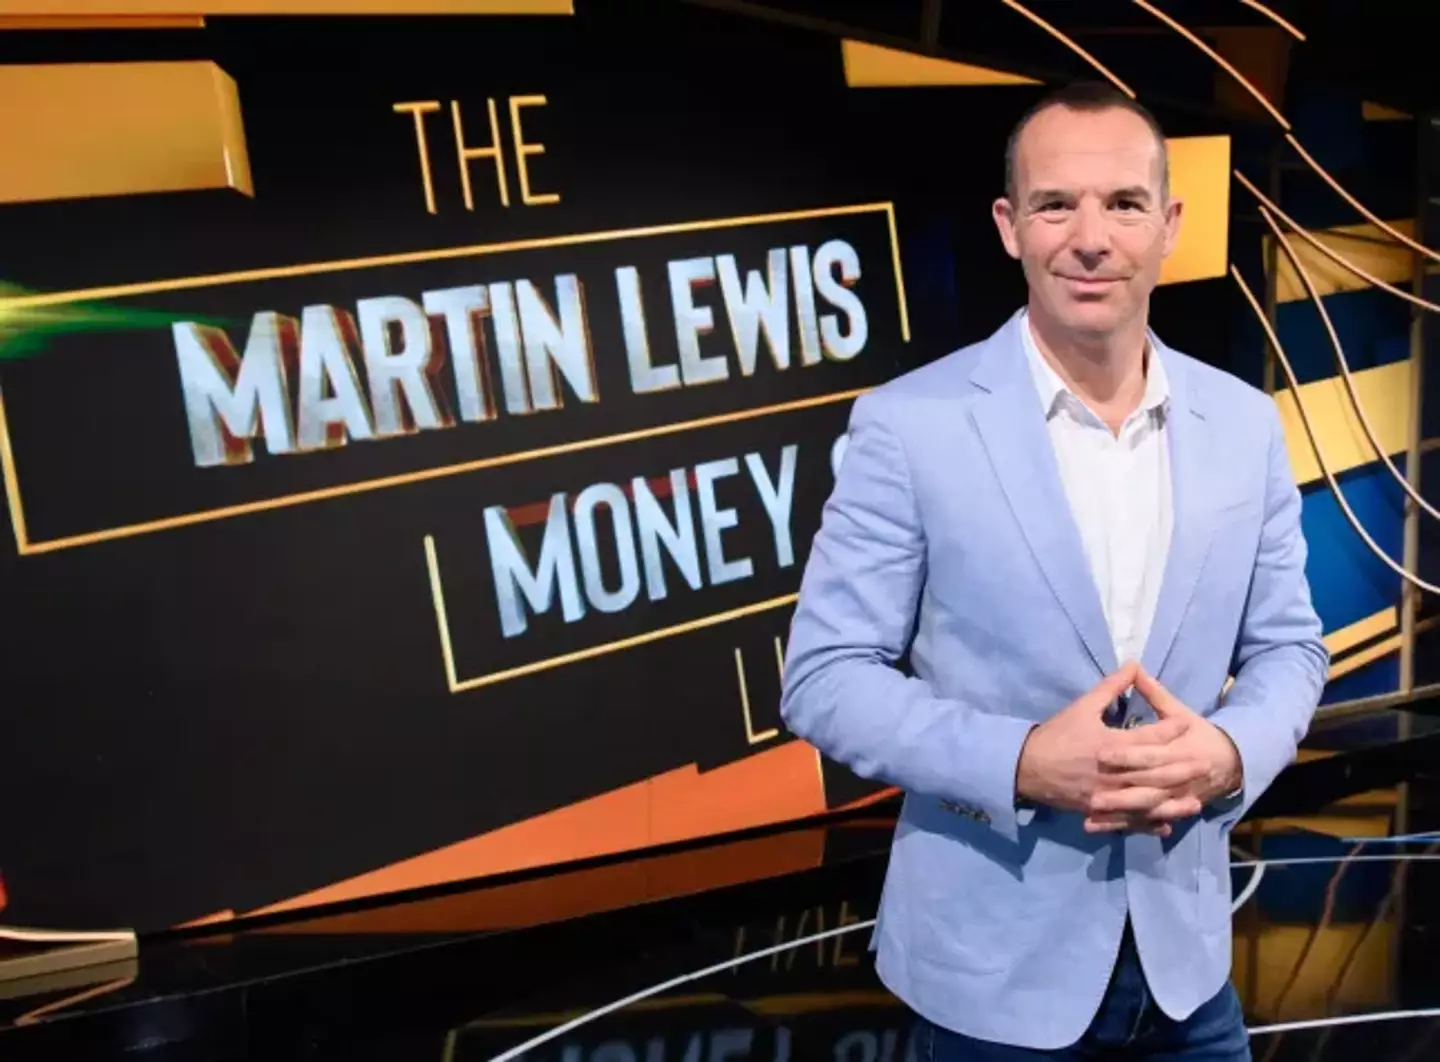 Martin Lewis gives regularly advice on his ITV money show.